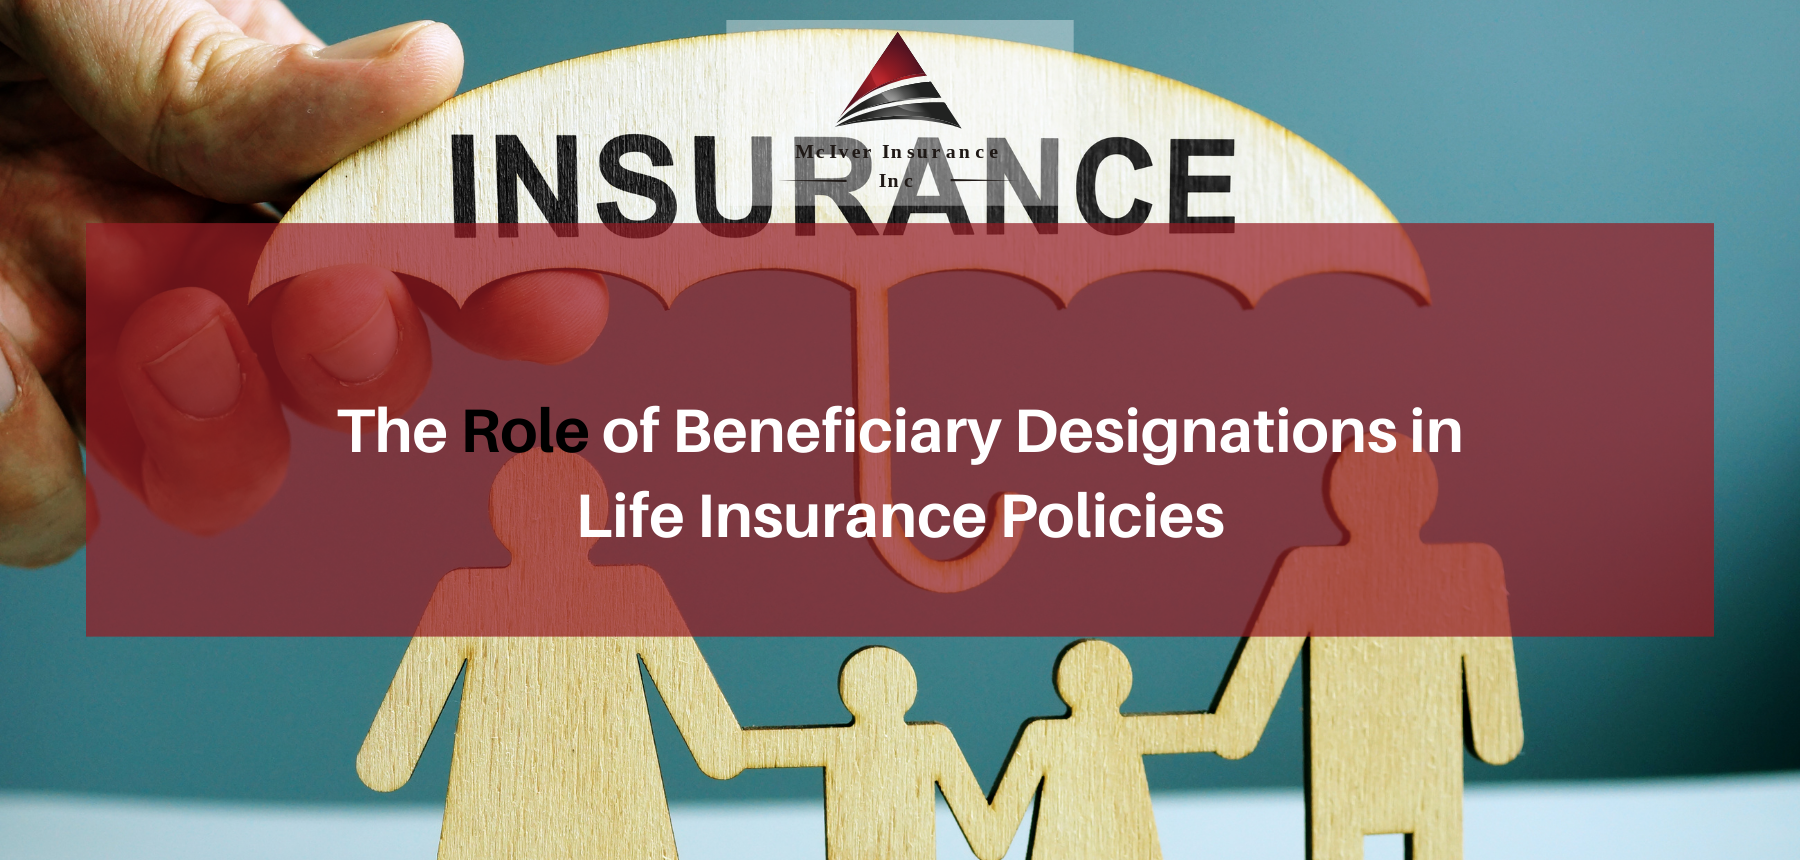 WThe Role of Beneficiary Designations in Life Insurance Policies